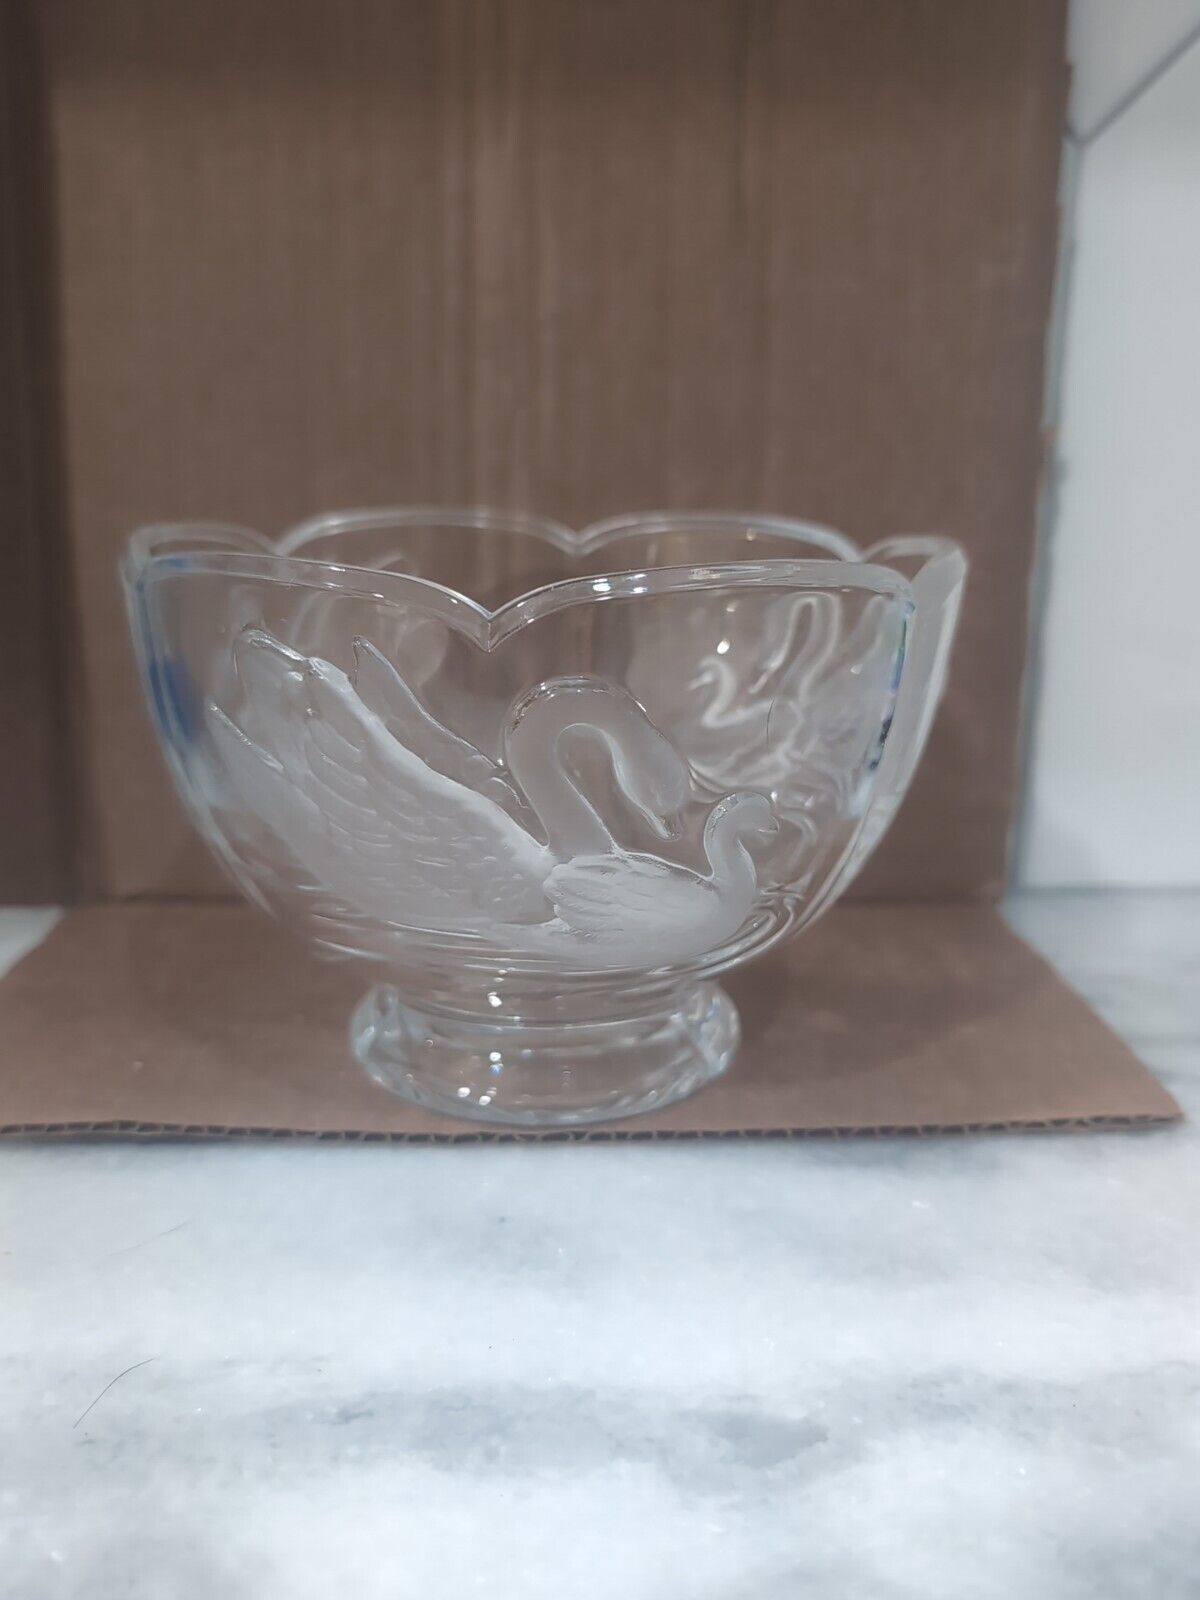 Primary image for Teleflora Crystal Bowl with Frosted Swan, Elegant Centerpiece, Footed Glass Bowl